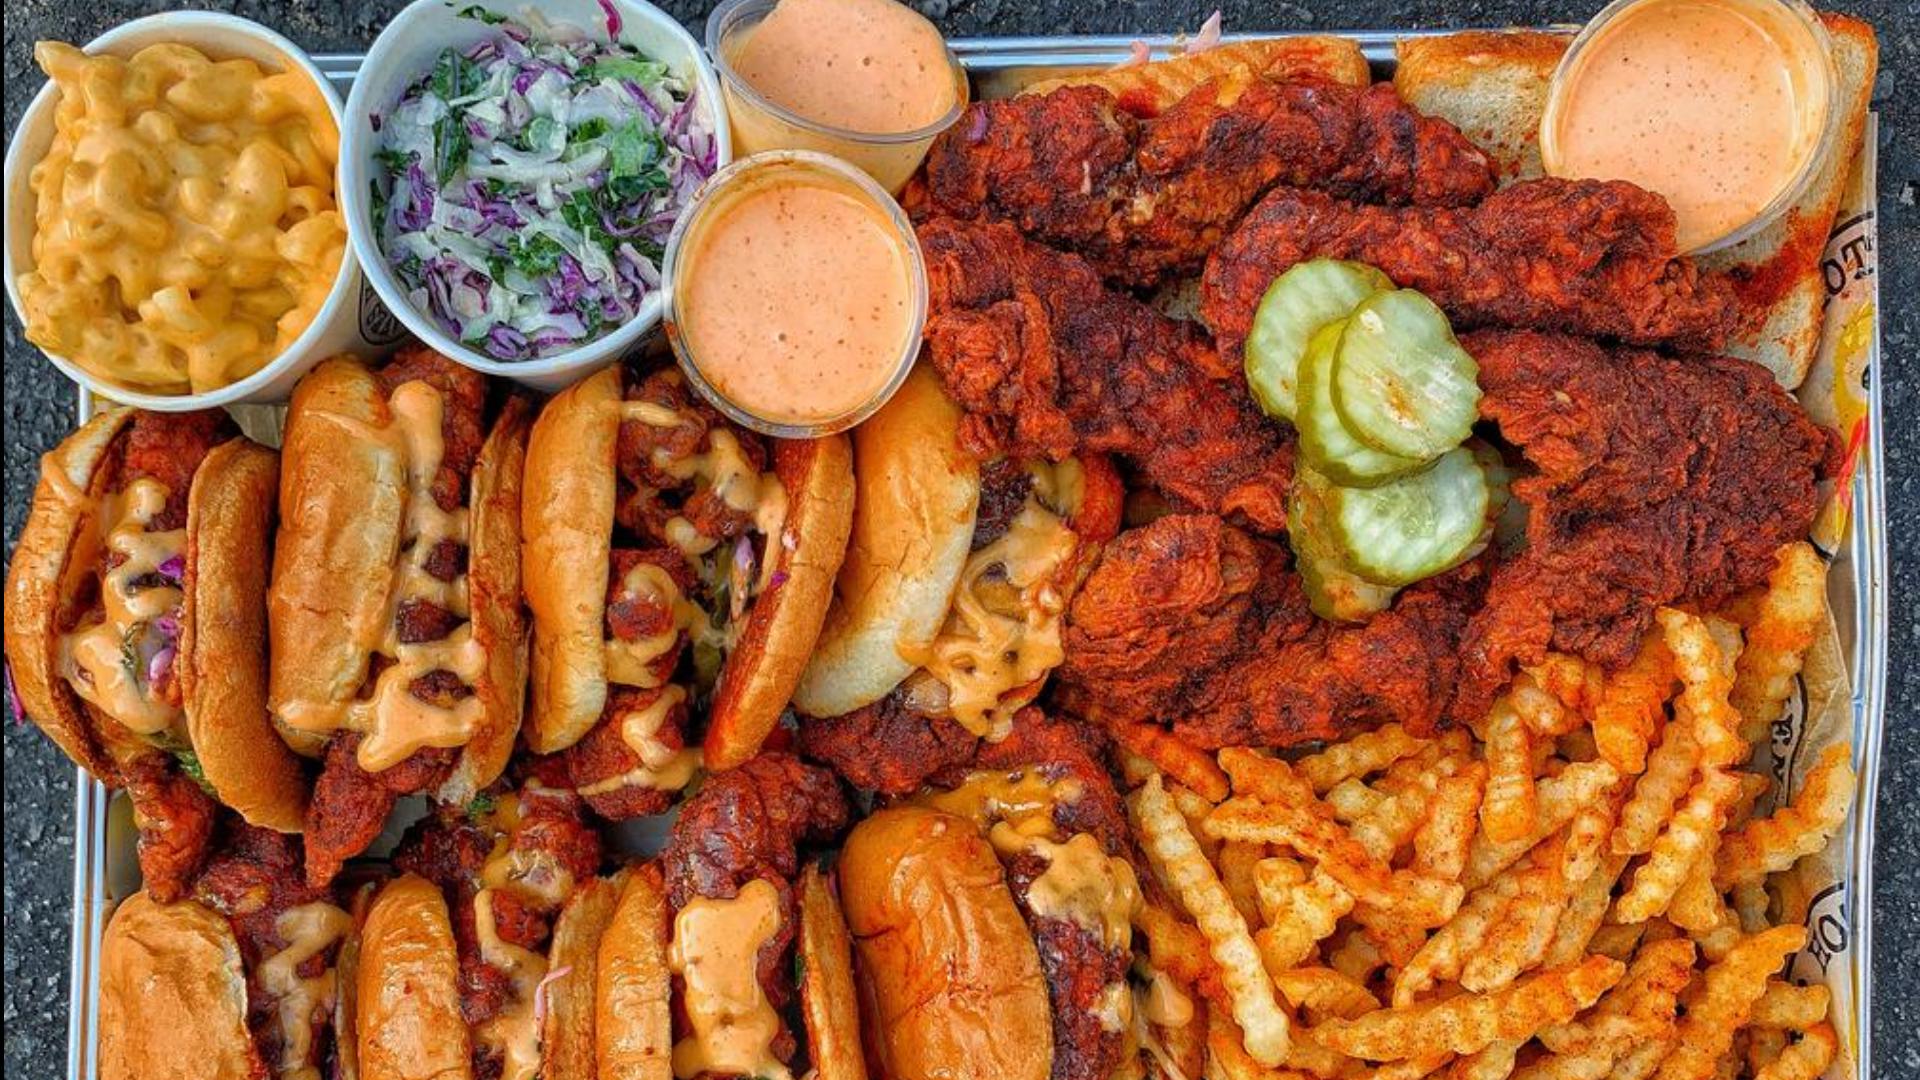 Dave’s Hot Chicken will open seven eateries in the St. Louis region, with hopes to open at least one location by the end of this year.